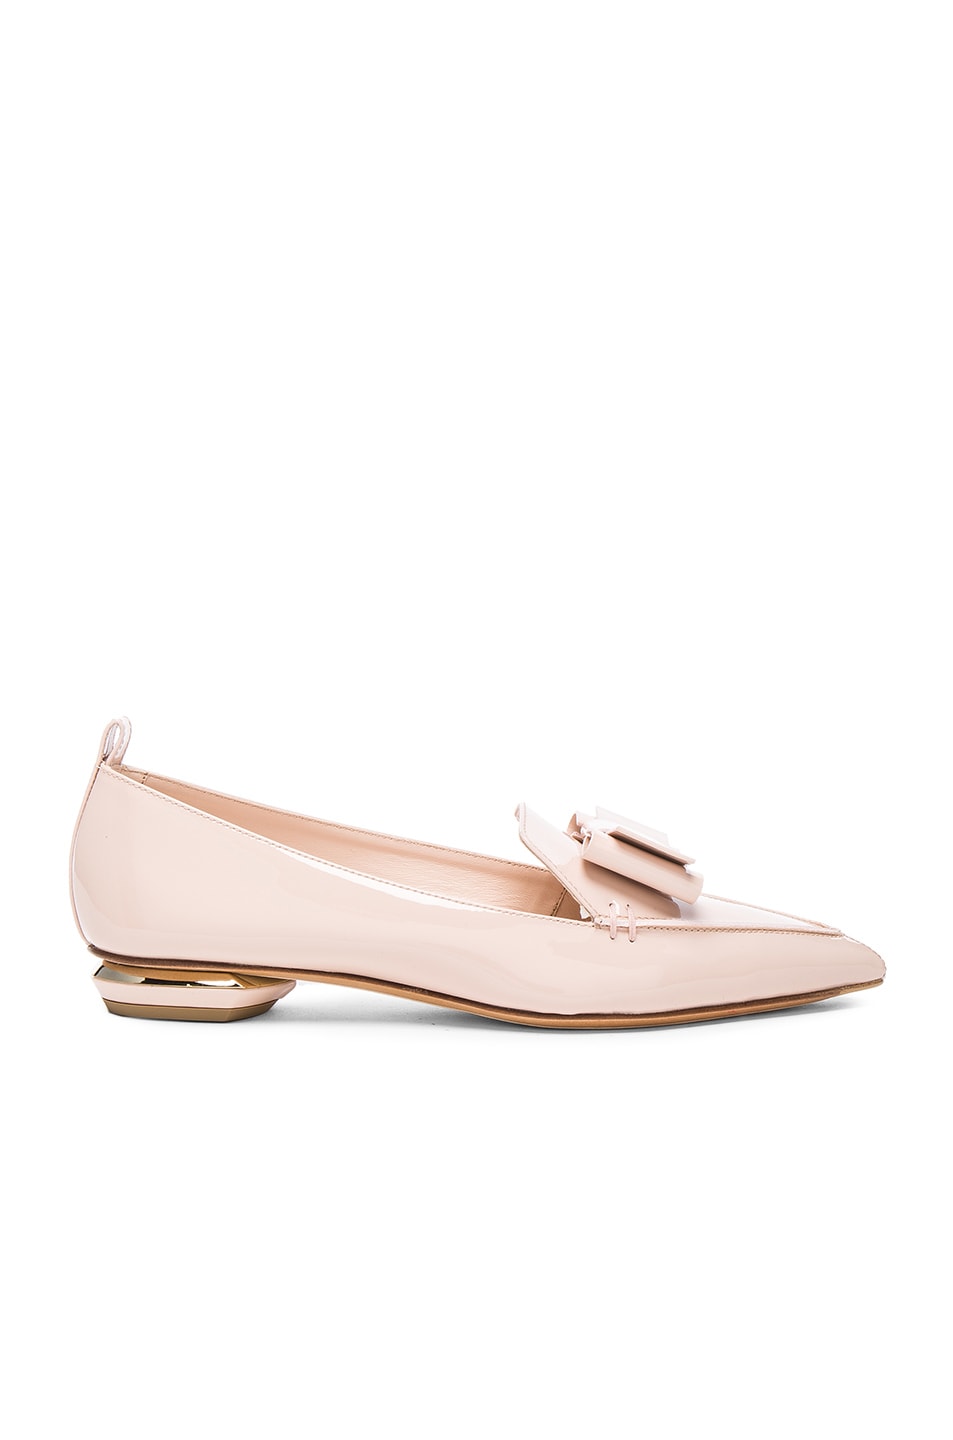 Image 1 of Nicholas Kirkwood Patent Leather Beya Bow Flats in Nude